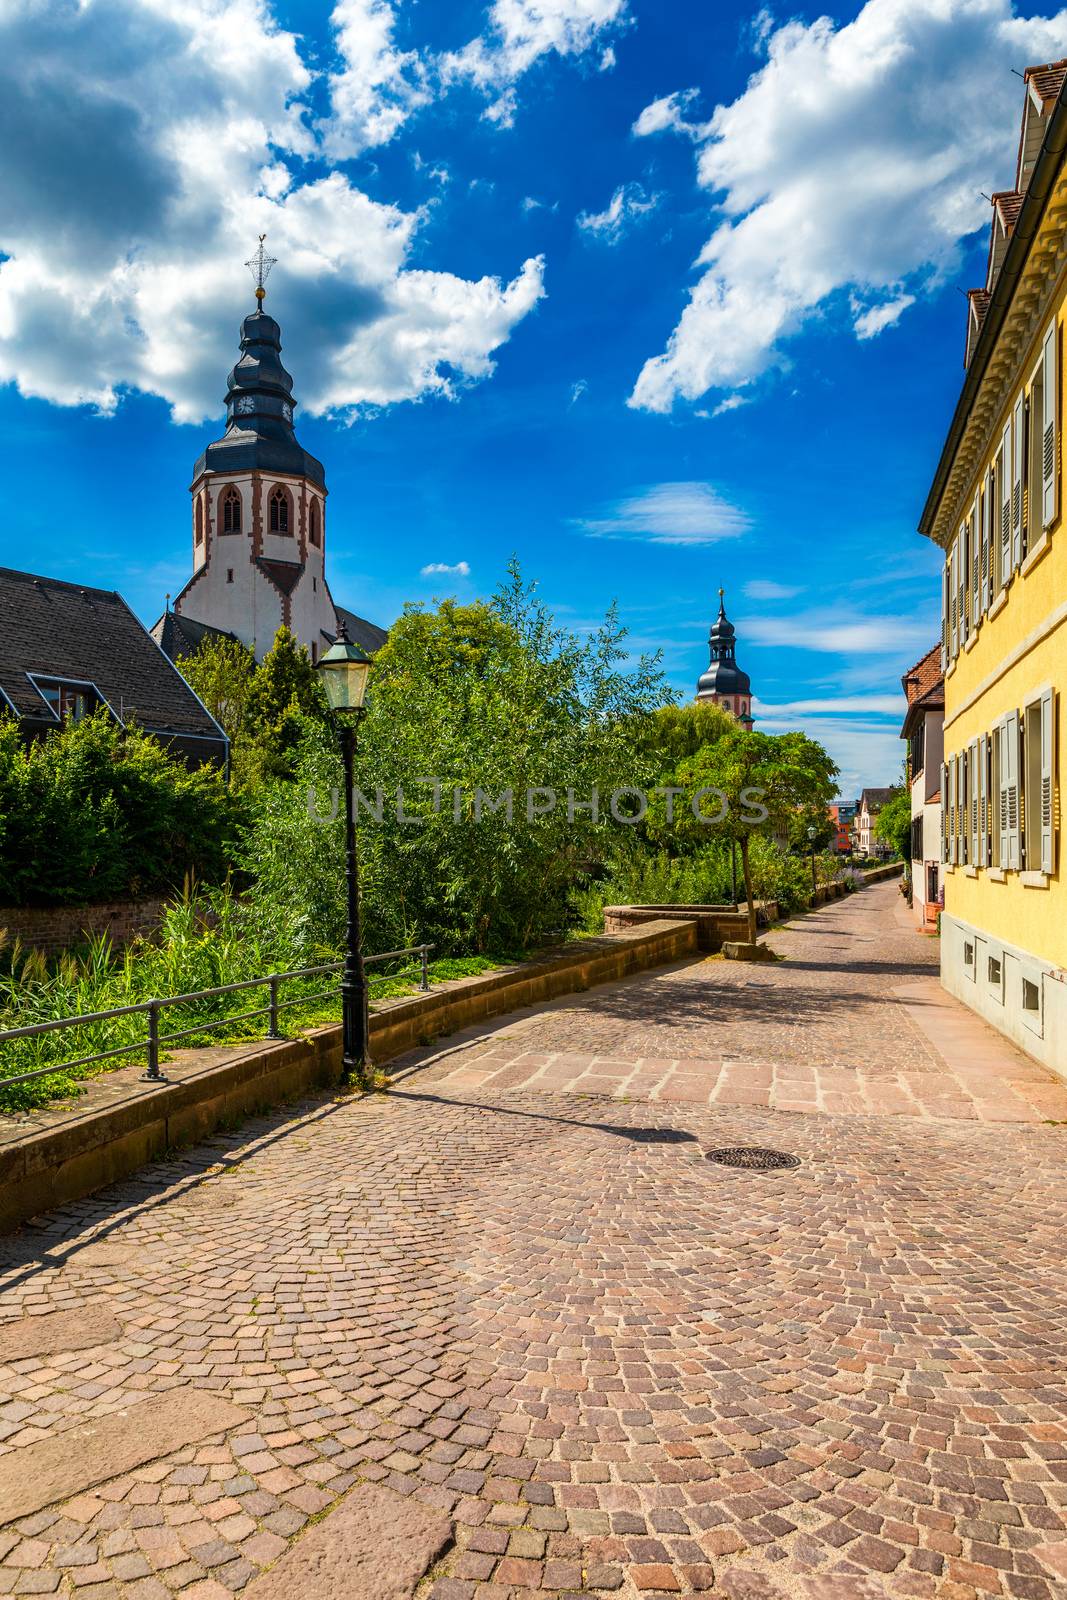 Old city of Ettlingen in Germany with a river and a church. View of a central district of Ettlingen, Germany, with a river and a bell tower of a church. Ettlingen, Baden Wurttemberg, Germany.